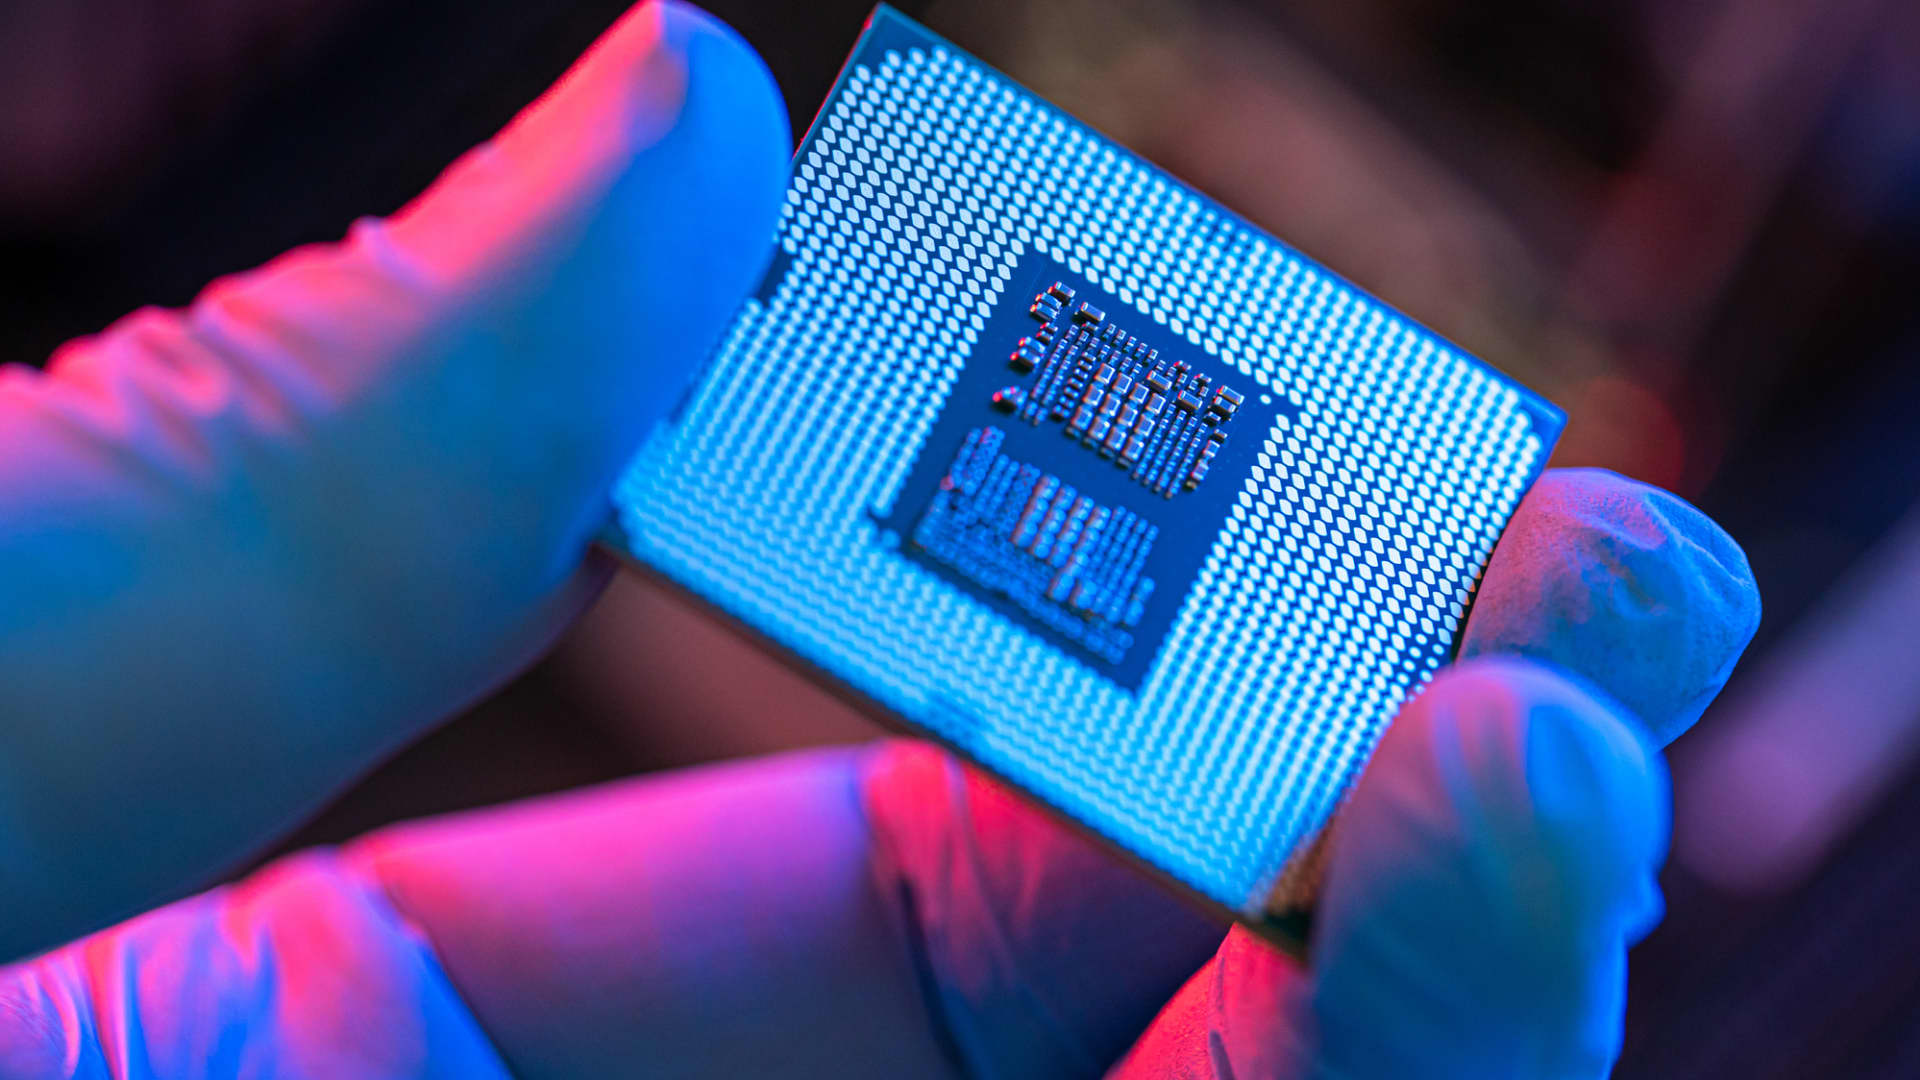 UK's $1.2B Semiconductor Plan in Response to U.S. and EU Chip Investments